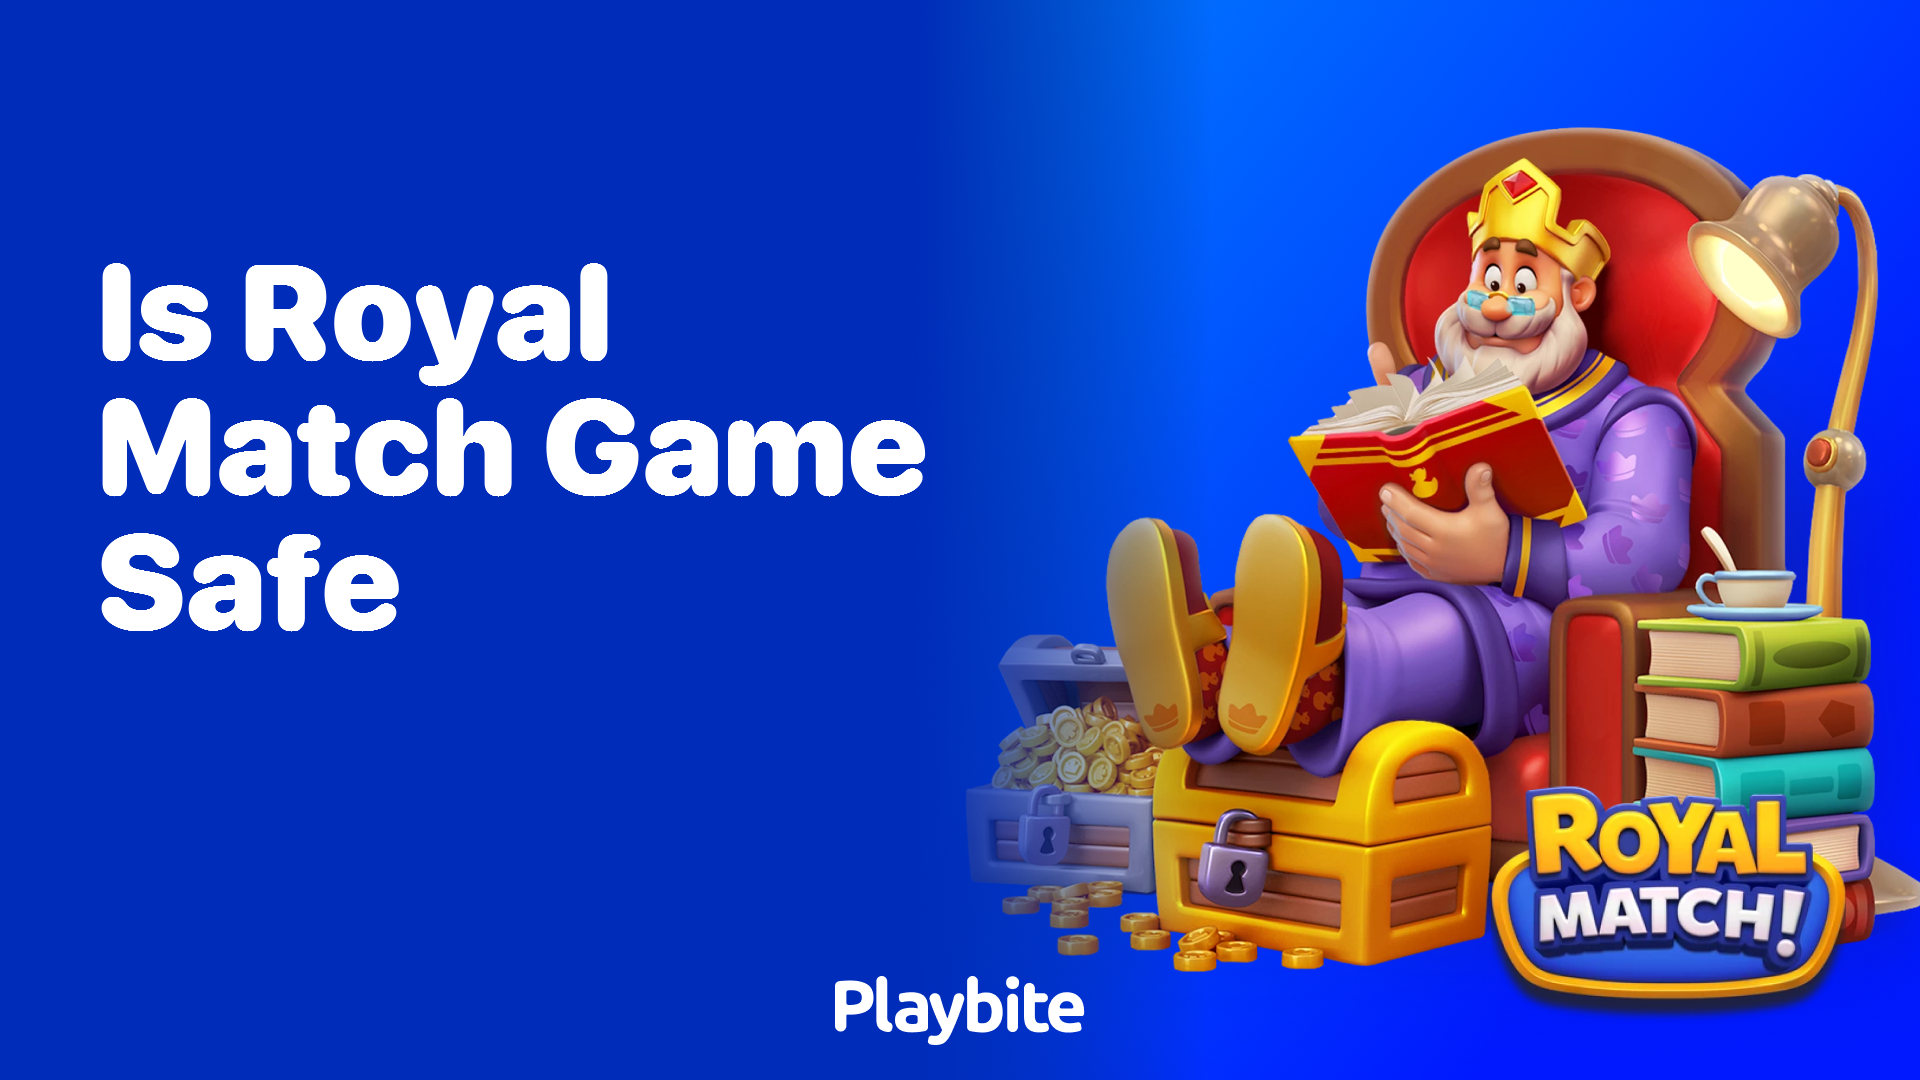 Is the Royal Match Game Safe? Explore the Facts